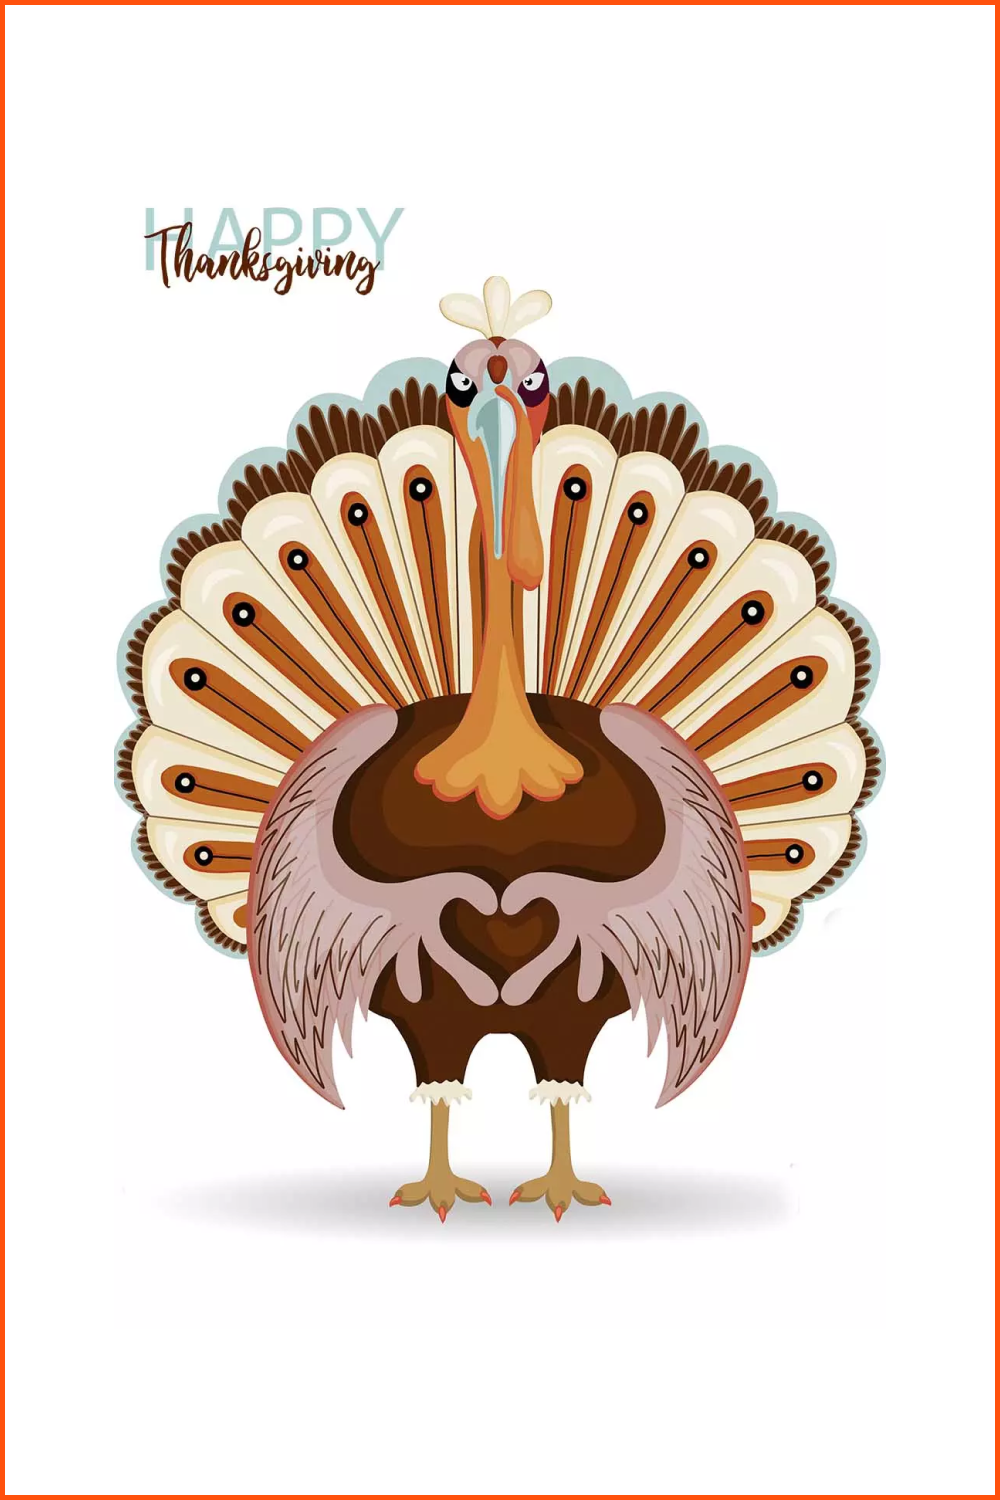 An image of a turkey that looks forward and depicts a heart with its wings.